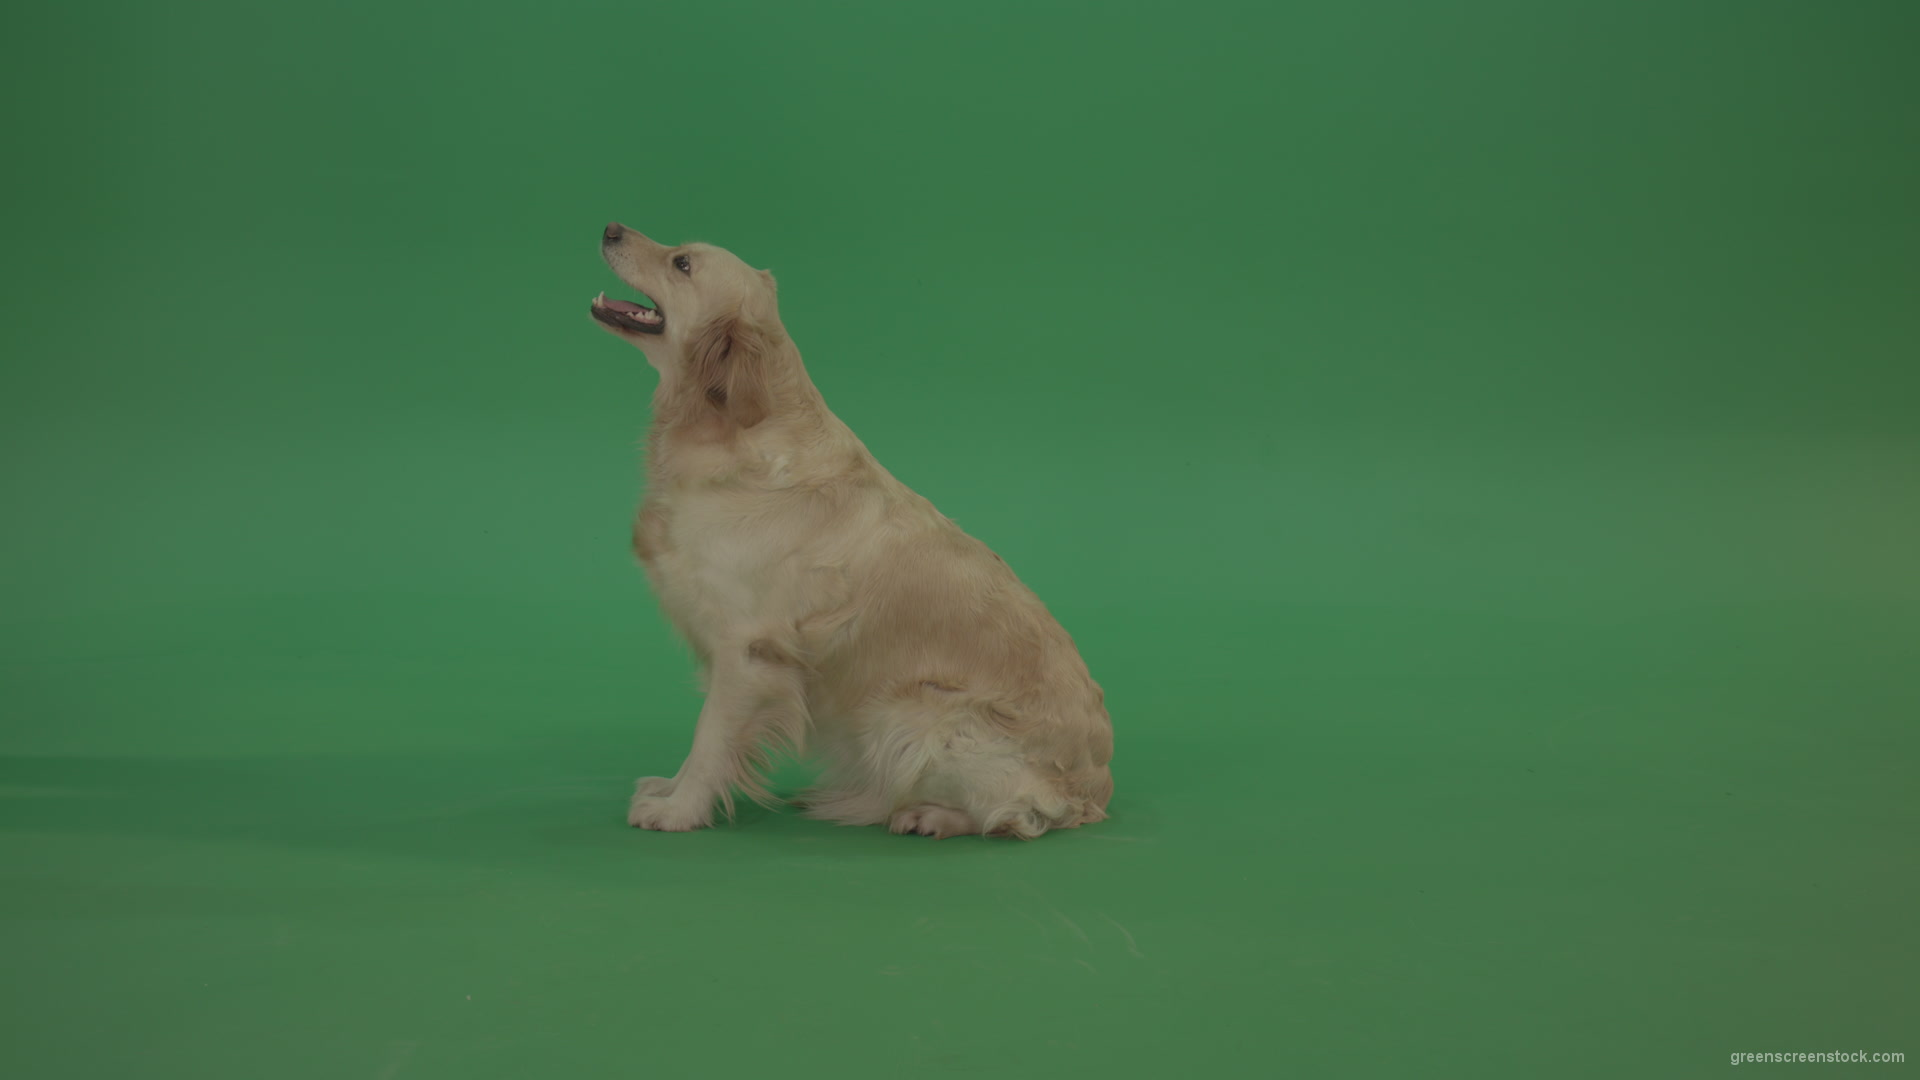 Golden-Retriever-green-screen-dog-in-side-view-barking-isolated-on-chromakey-green-background_006 Green Screen Stock